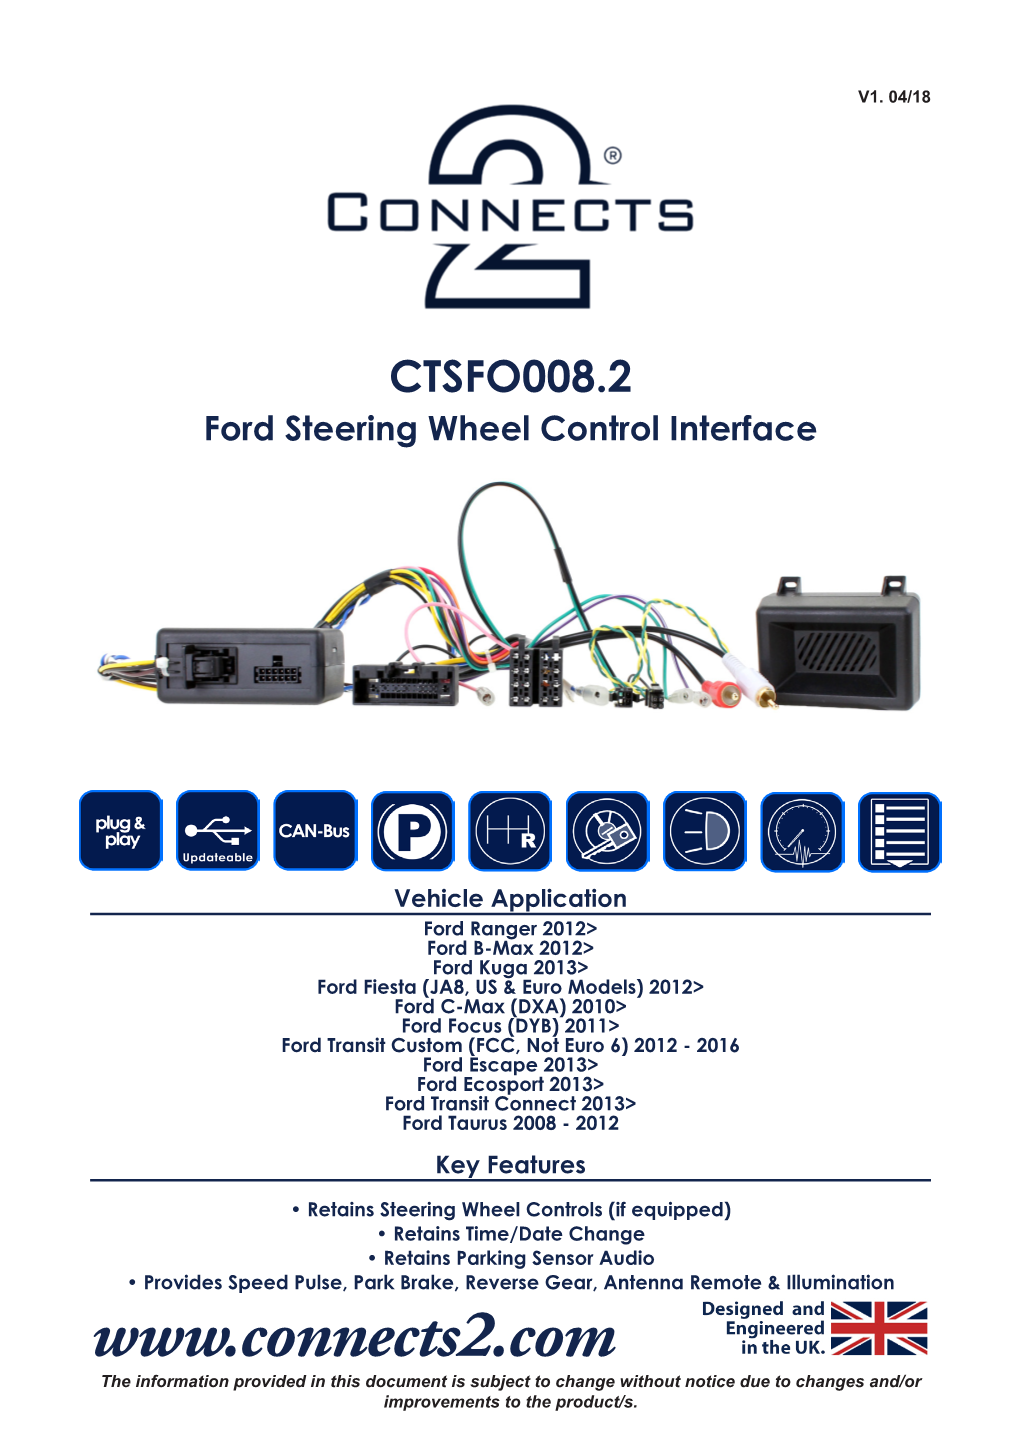 CTSFO008.2 Ford Steering Wheel Control Interface